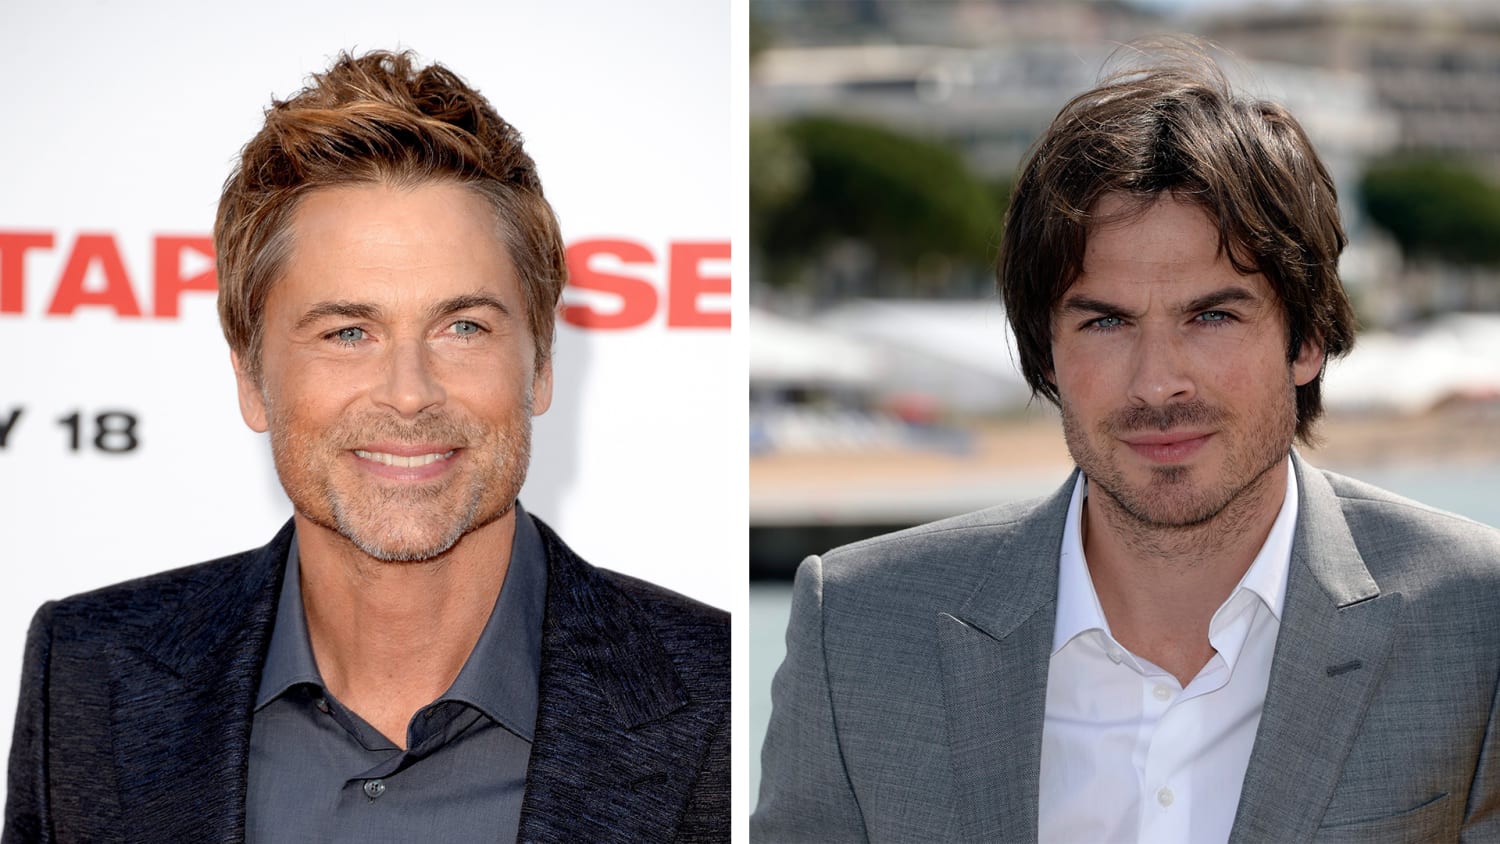 These celeb doppelgangers may make you double take - especially if you're a  history buff